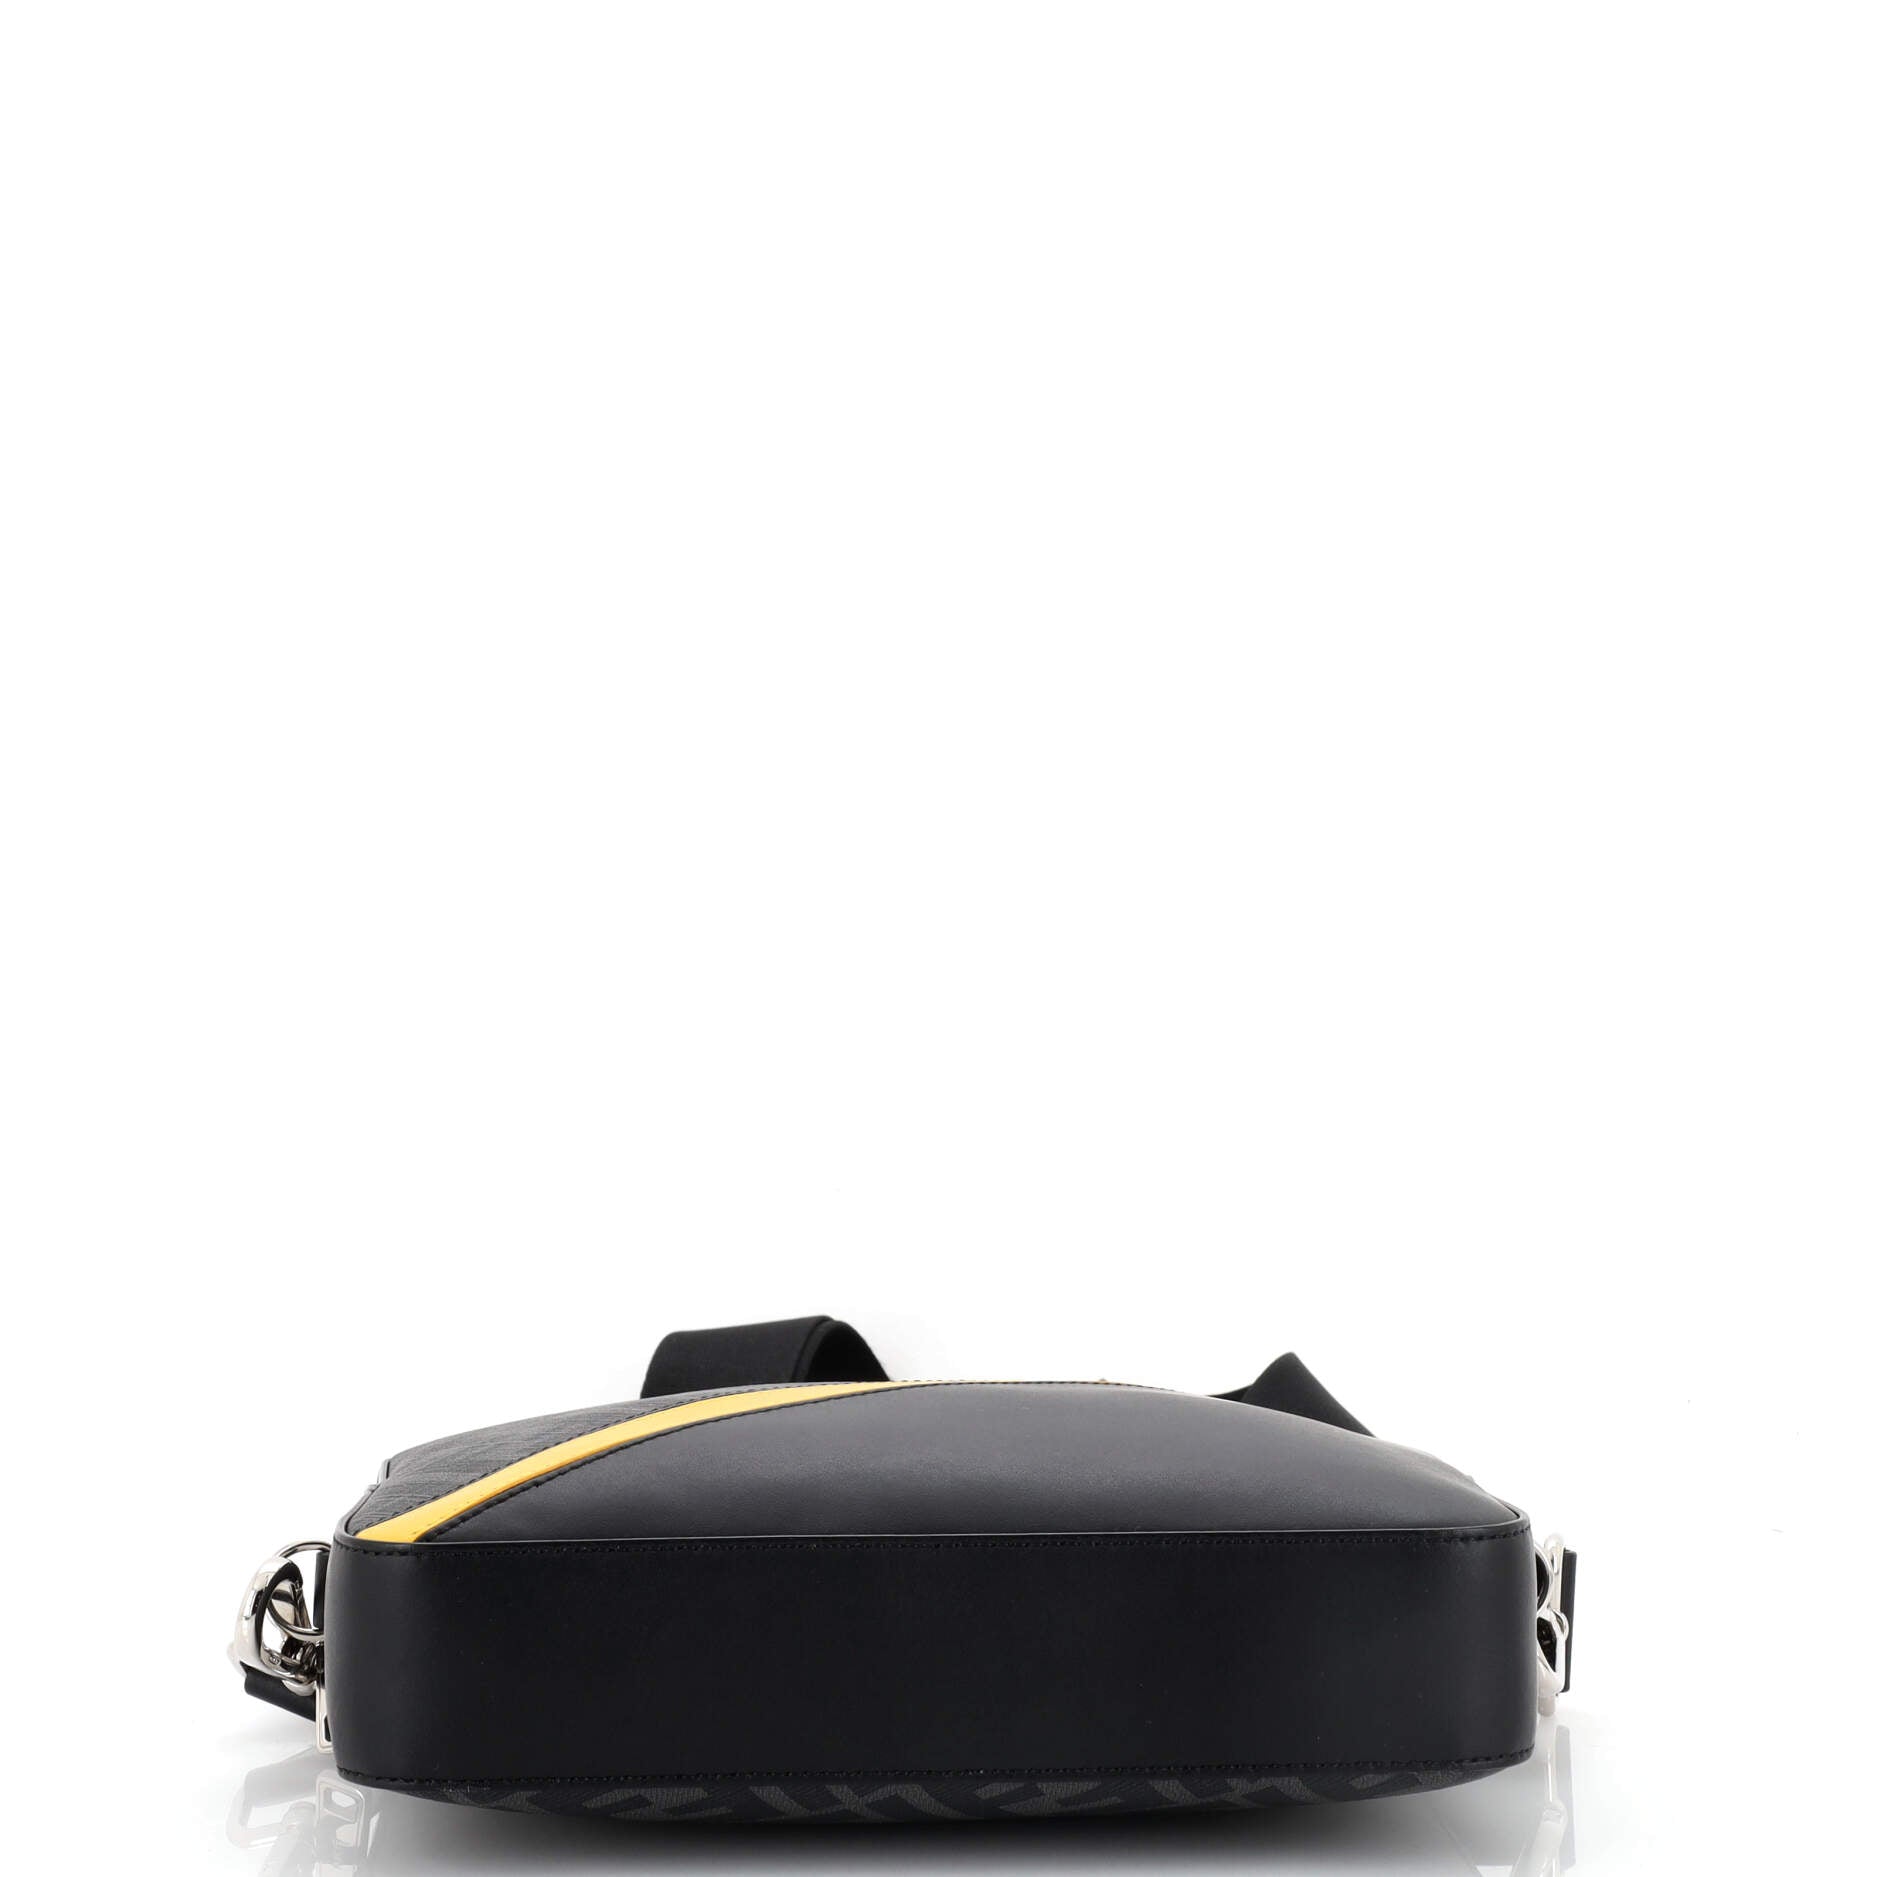 Fendi Camera Case Bag Zucca Coated Canvas and Leather Small Black, Yellow